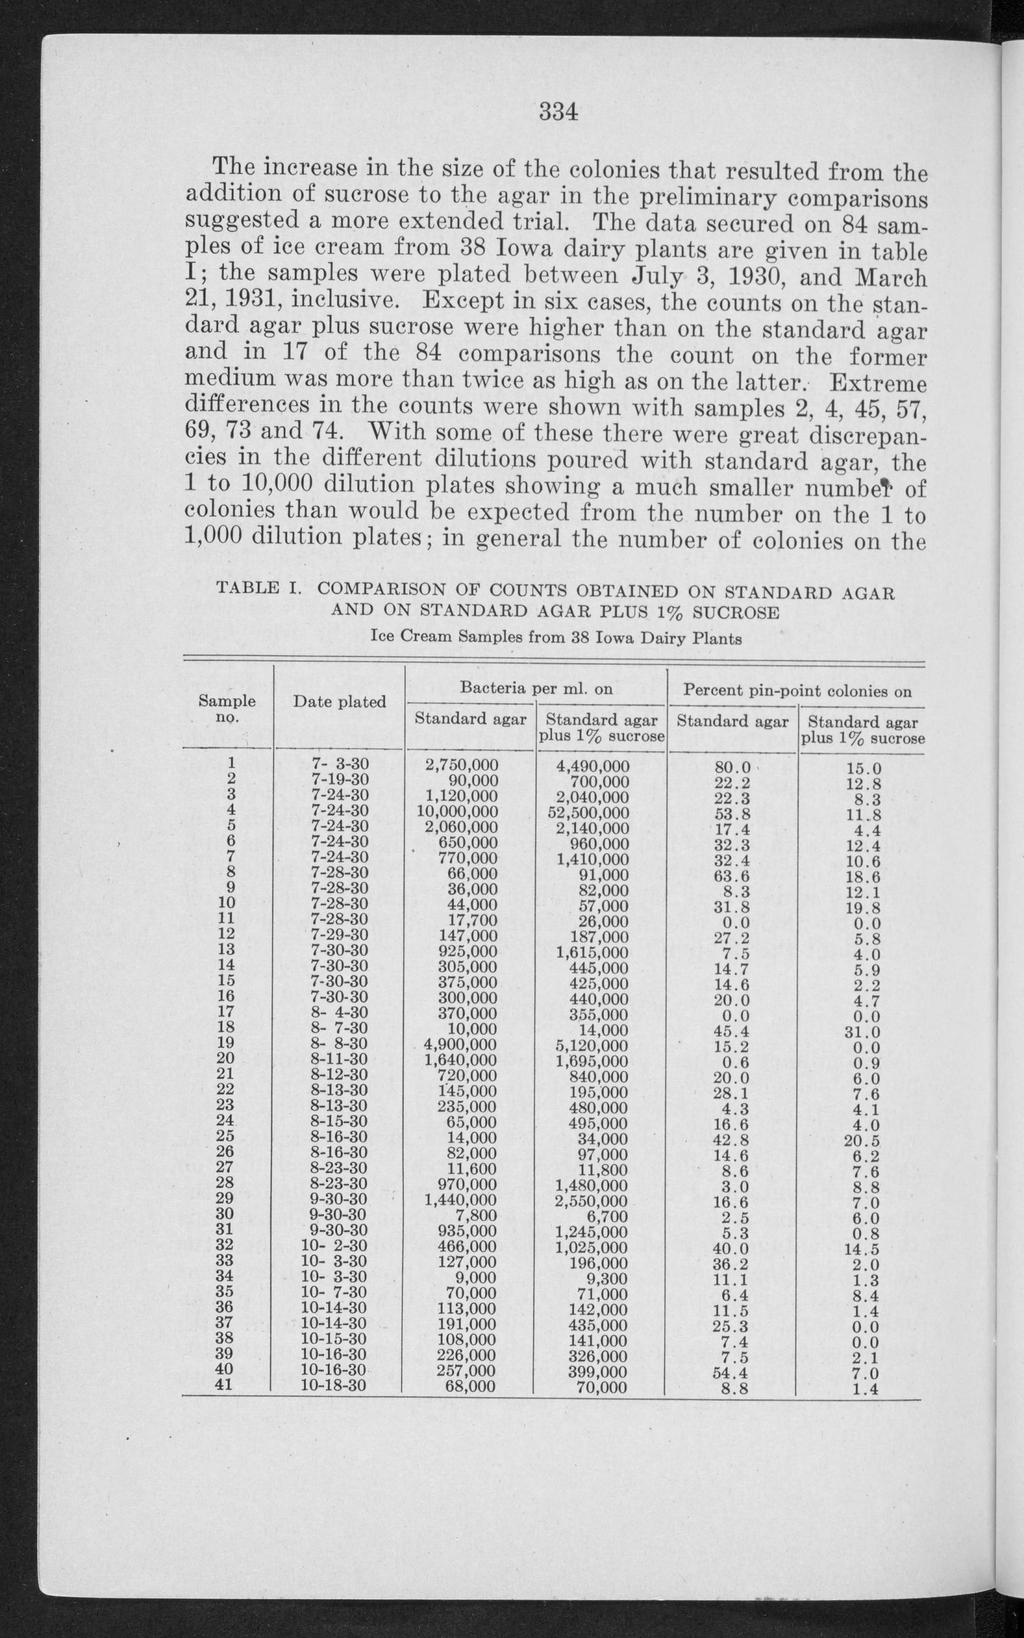 Bulletin, Vol. 24 [1930], No. 285, Art. 1 334 The increase in the size of the colonies that resulted from the addition of to the in the preliminary comparisons suggested a more extended trial.